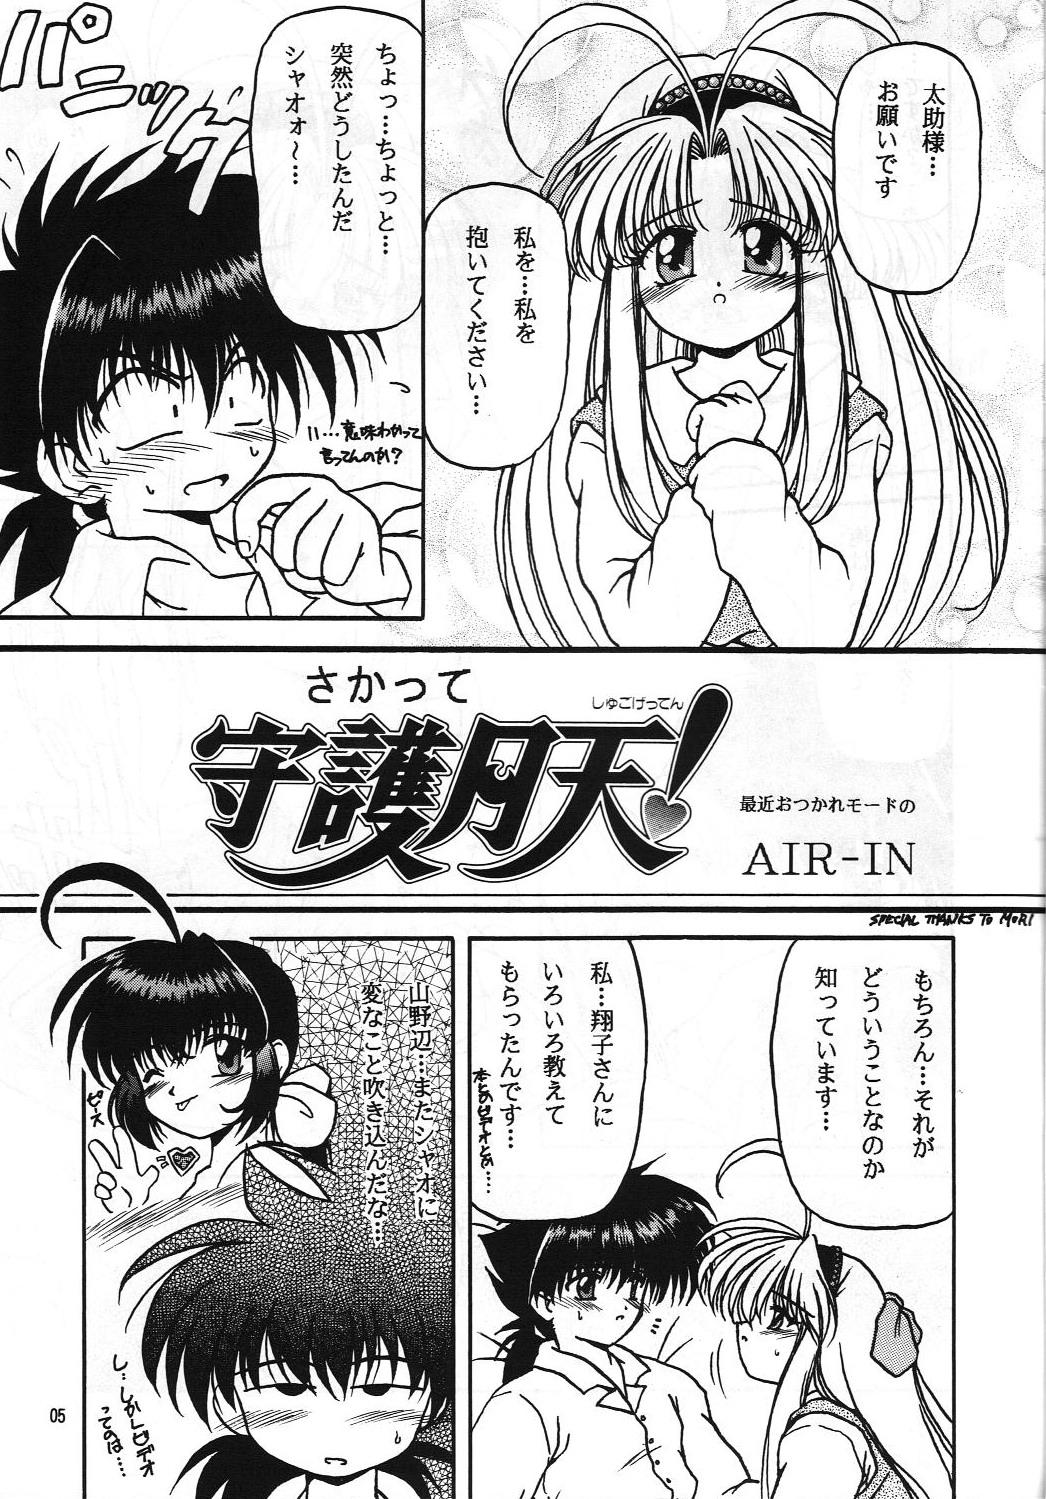 Blowjobs PLUS-Y Vol.23 - Darkstalkers Super doll licca-chan Mamotte shugogetten Dick Suckers - Page 4